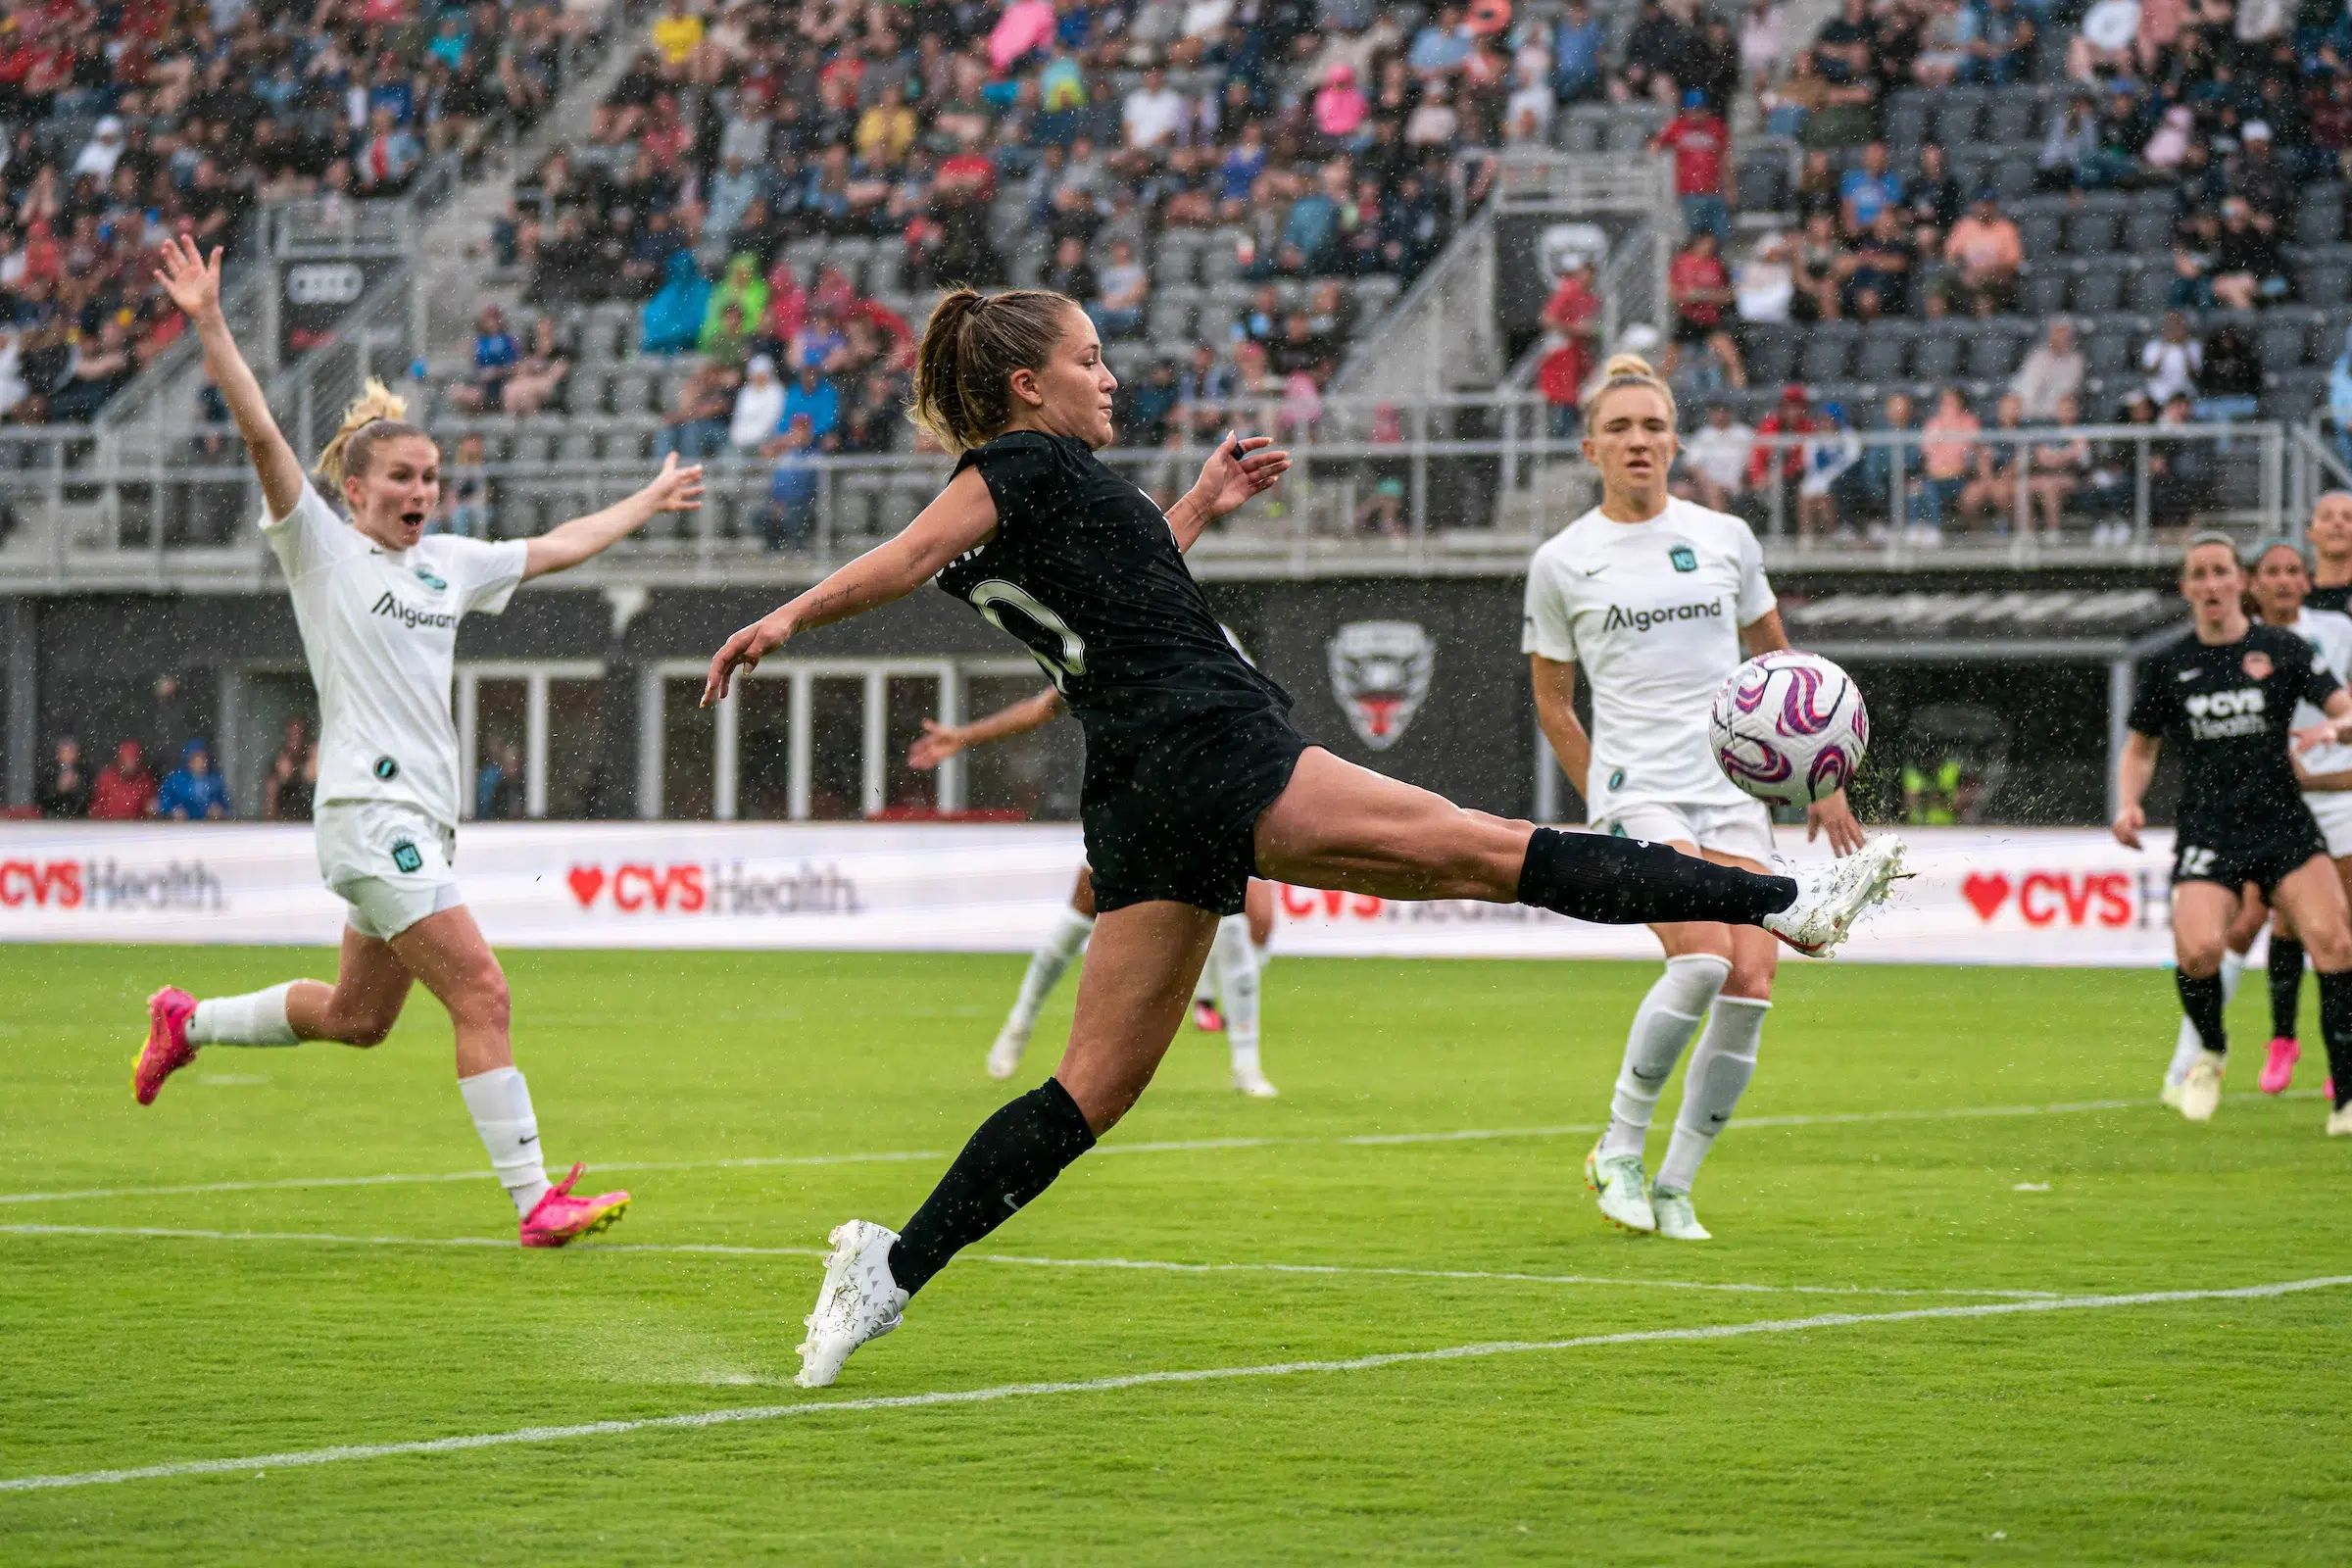 Ashley Sanchez in an all-black uniform extends her leg out to trap a soccer ball as two defenders in white jerseys look on. Rain is visibly pouring down onto the field.